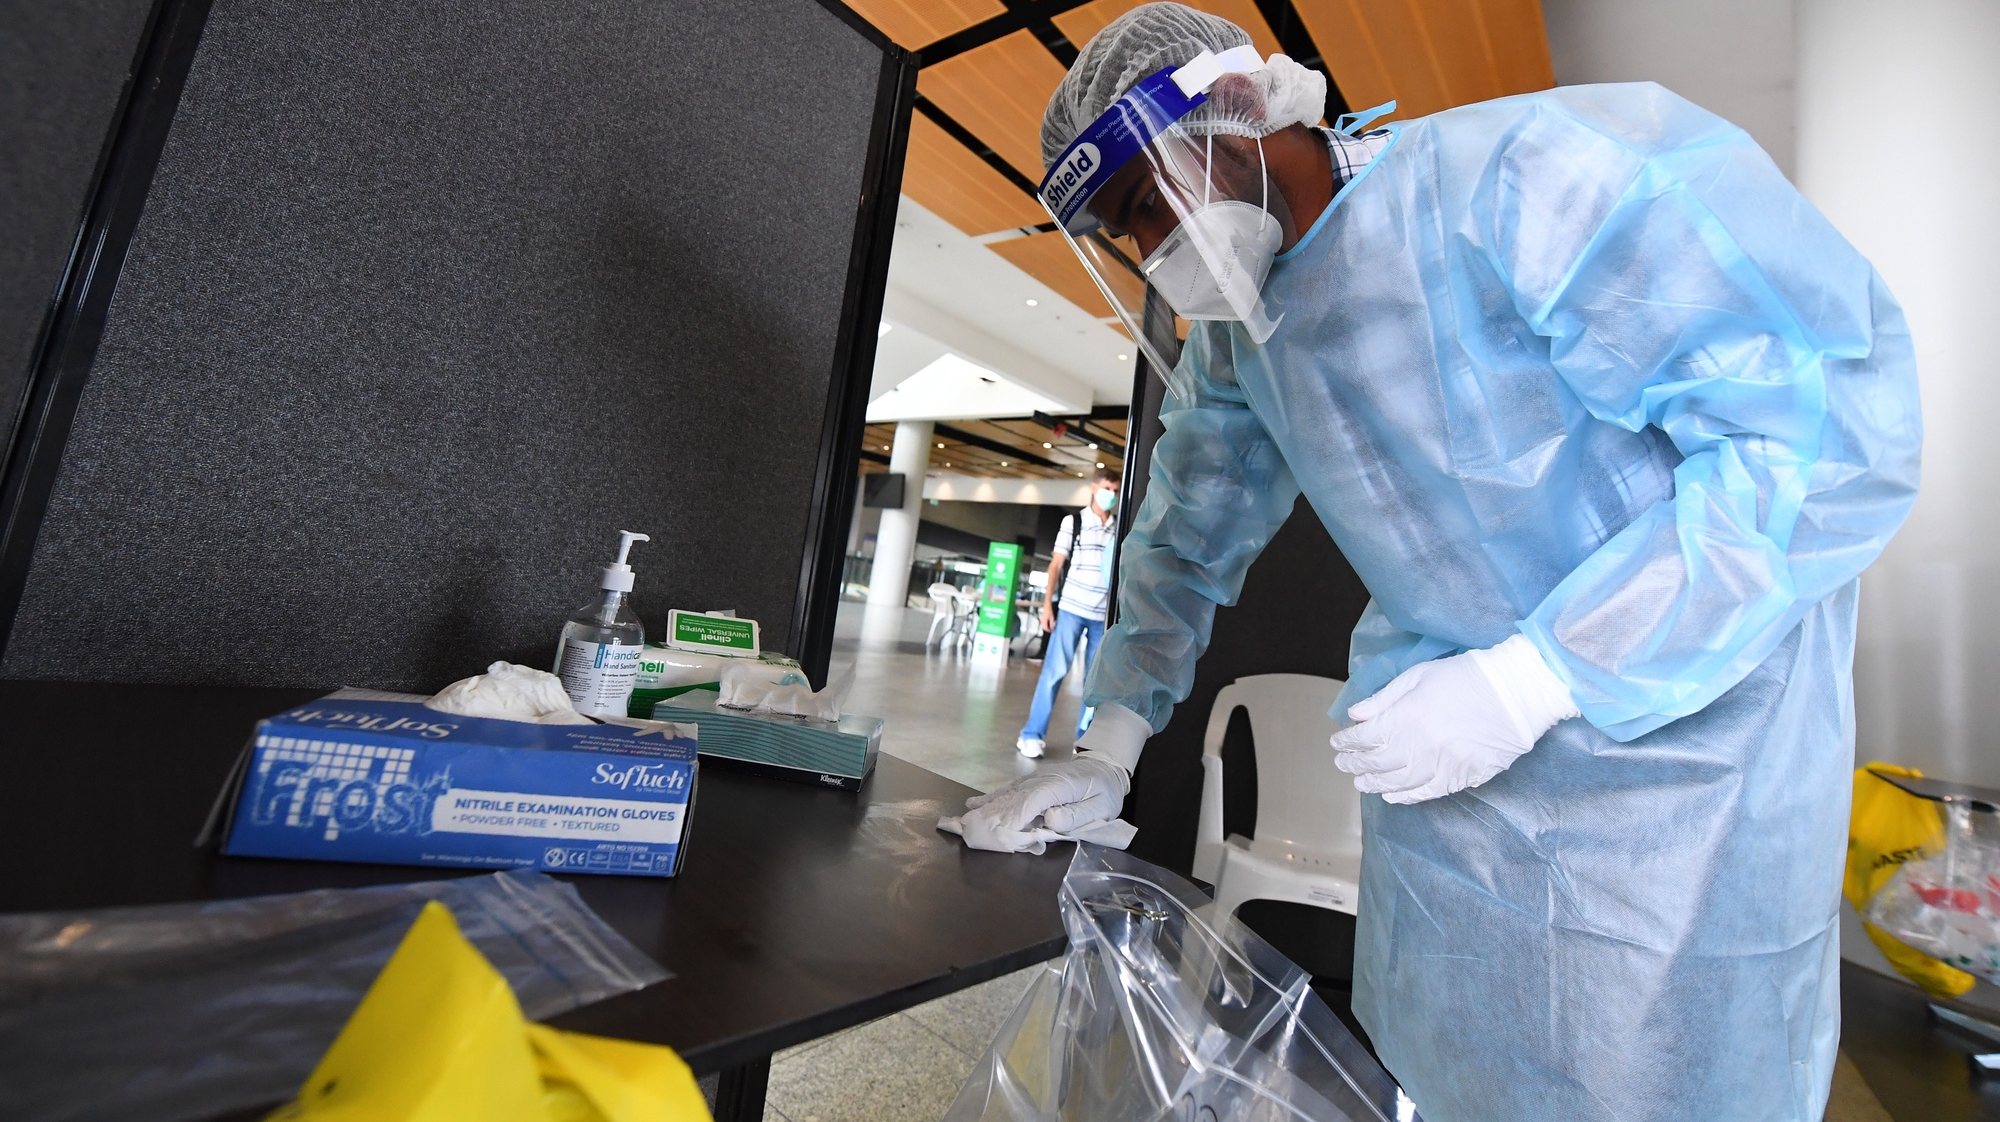 epa08921385 A healthcare worker sanitizes a table at a coronavirus testing facility at the MCG stadium in Melbourne, Australia, 06 January 2021. The MCG has been listed as a potential location for a recent cluster of COVID-19 infections after a man attended day two of the Boxing Day Test and later tested positive to coronavirus.  EPA/JAMES ROSS AUSTRALIA AND NEW ZEALAND OUT